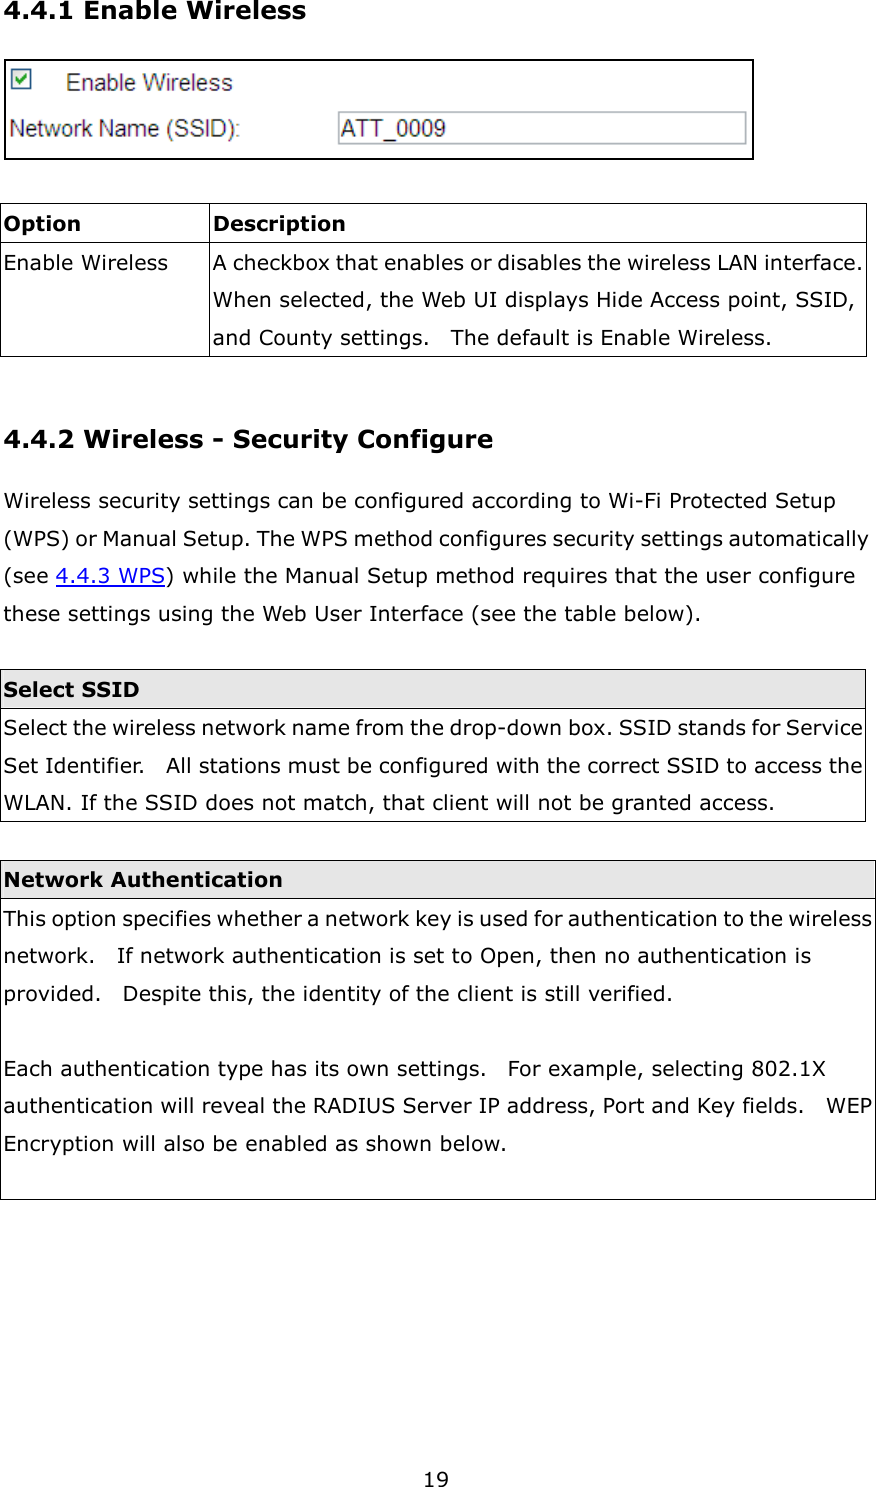 19 4.4.1 Enable Wireless   Option  Description Enable Wireless A checkbox that enables or disables the wireless LAN interface.   When selected, the Web UI displays Hide Access point, SSID, and County settings.    The default is Enable Wireless.  4.4.2 Wireless - Security Configure Wireless security settings can be configured according to Wi-Fi Protected Setup (WPS) or Manual Setup. The WPS method configures security settings automatically (see 4.4.3 WPS) while the Manual Setup method requires that the user configure these settings using the Web User Interface (see the table below).  Select SSID Select the wireless network name from the drop-down box. SSID stands for Service Set Identifier.    All stations must be configured with the correct SSID to access the WLAN. If the SSID does not match, that client will not be granted access.  Network Authentication This option specifies whether a network key is used for authentication to the wireless network.    If network authentication is set to Open, then no authentication is provided.    Despite this, the identity of the client is still verified.      Each authentication type has its own settings.    For example, selecting 802.1X authentication will reveal the RADIUS Server IP address, Port and Key fields.    WEP Encryption will also be enabled as shown below.  